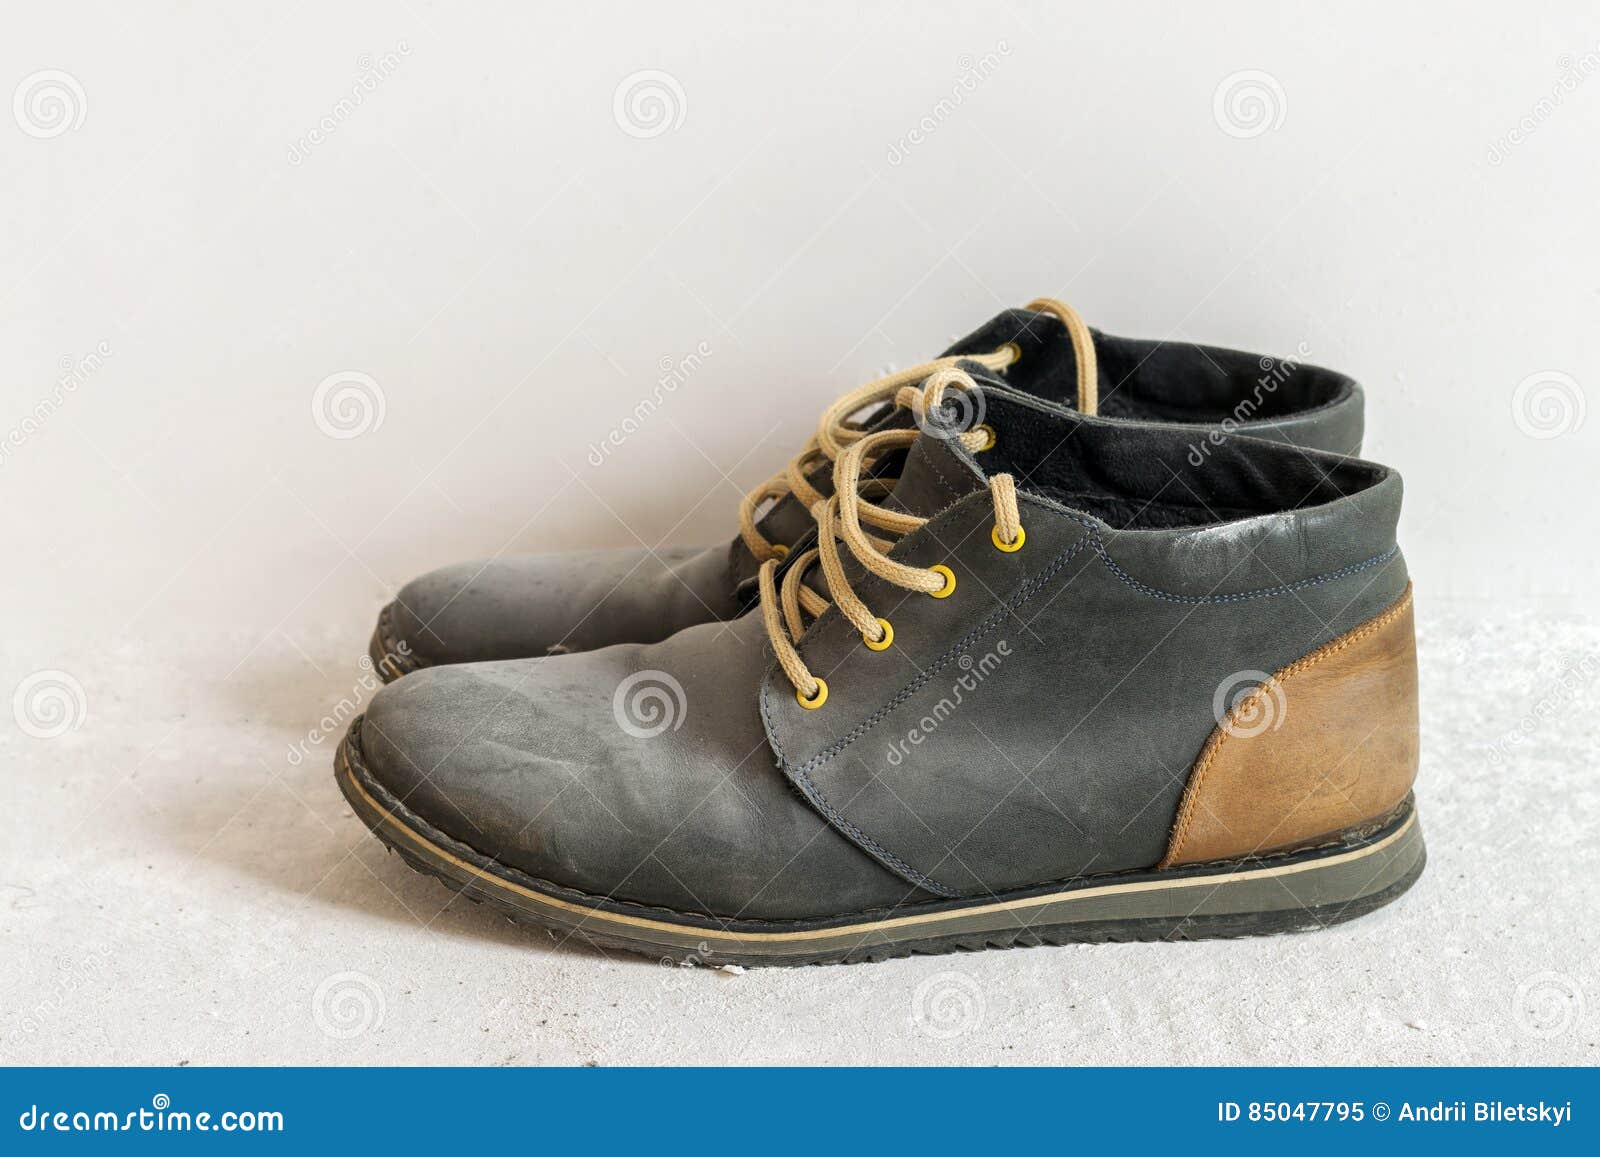 Old Dirty Dusty Worn Out Shoes Stock Image - Image of prints, rough ...